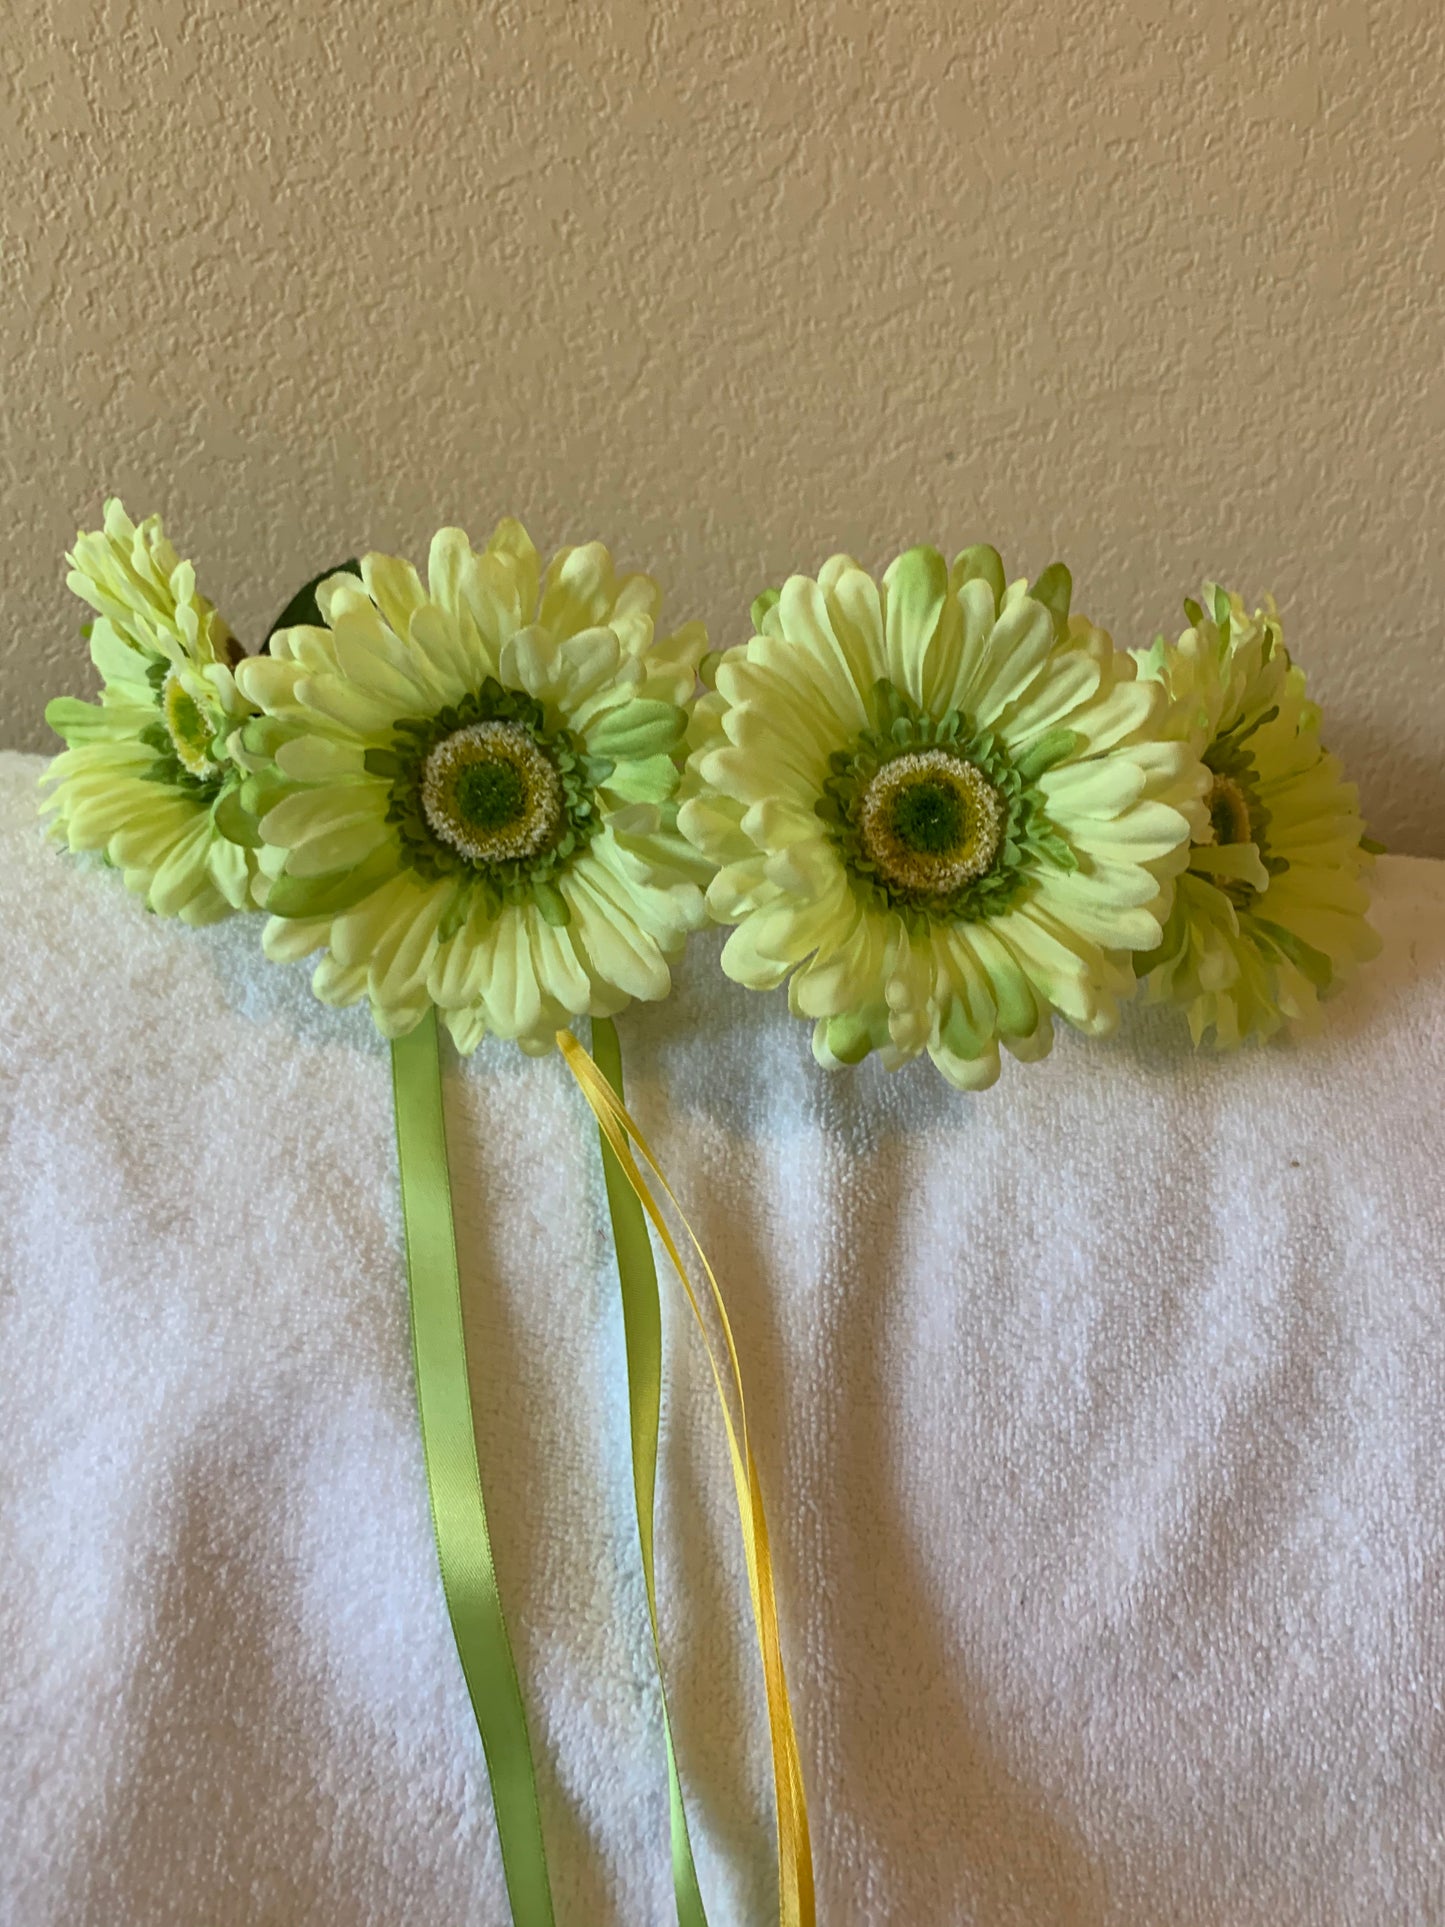 Large Wreath Lighted - All Green Daisies